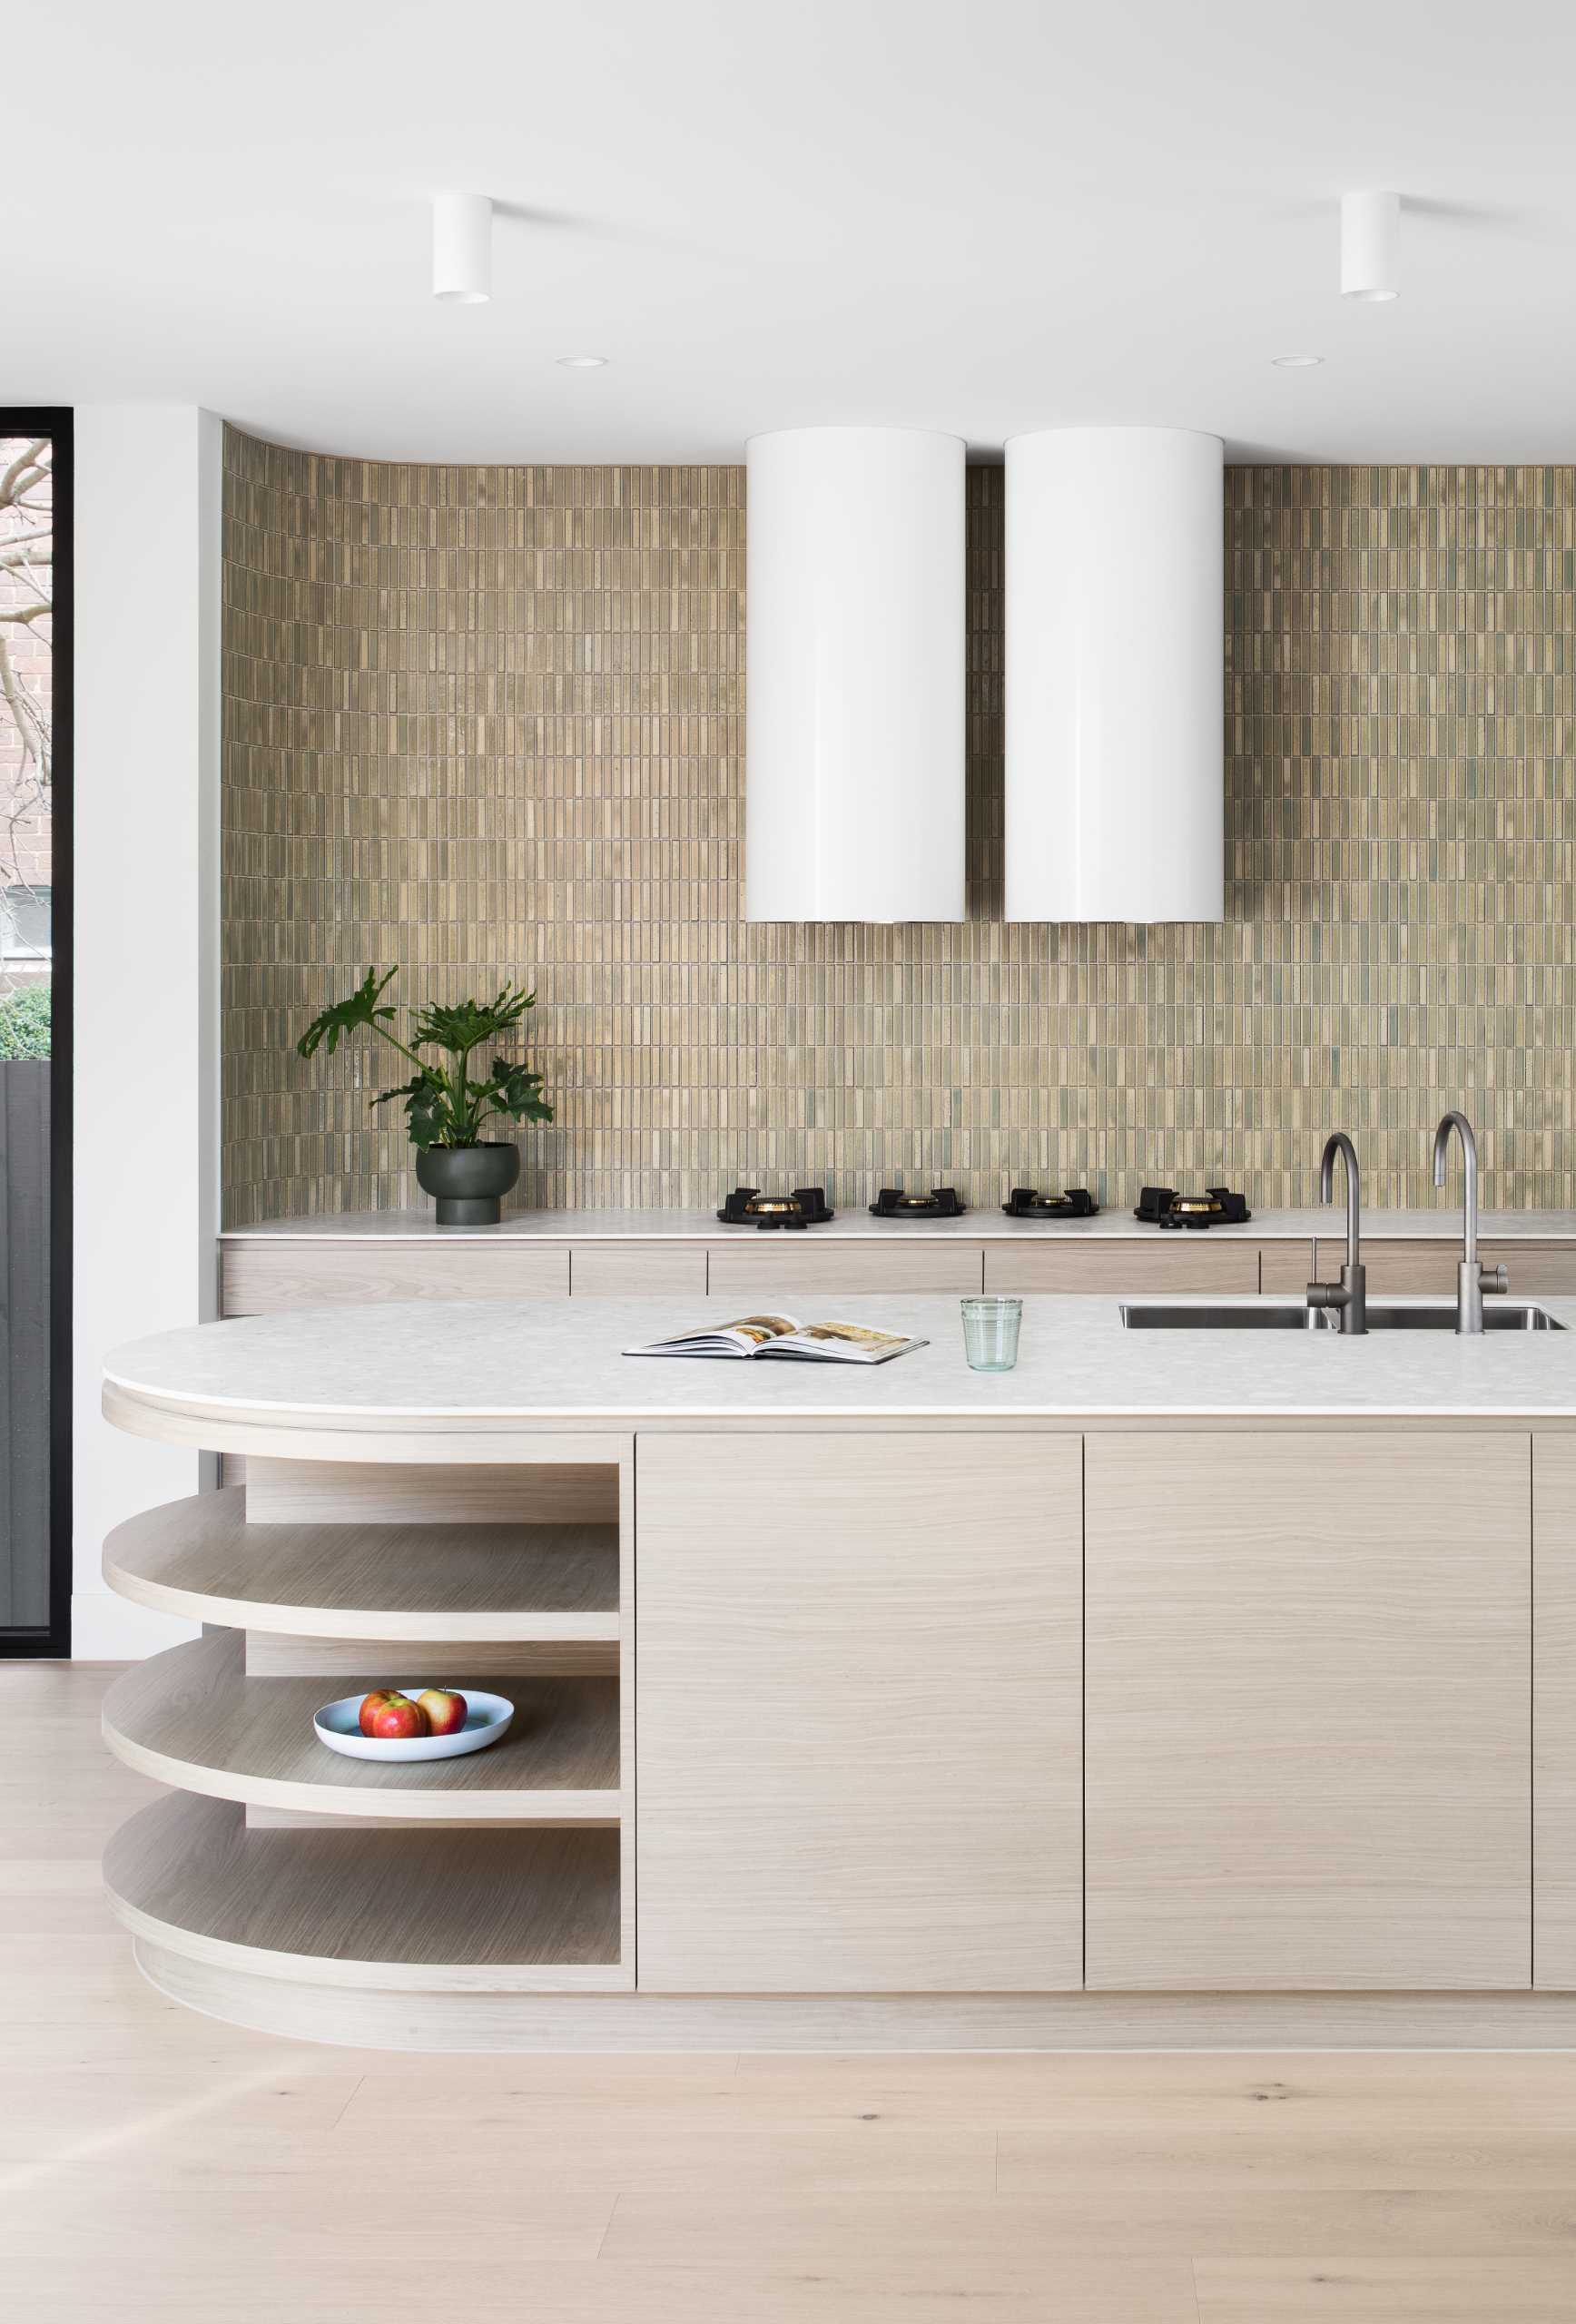 This modern kitchen features a tiled wall, wood cabinets, and an island with curved ends. One end is dedicated to seating, while the other has open shelving.